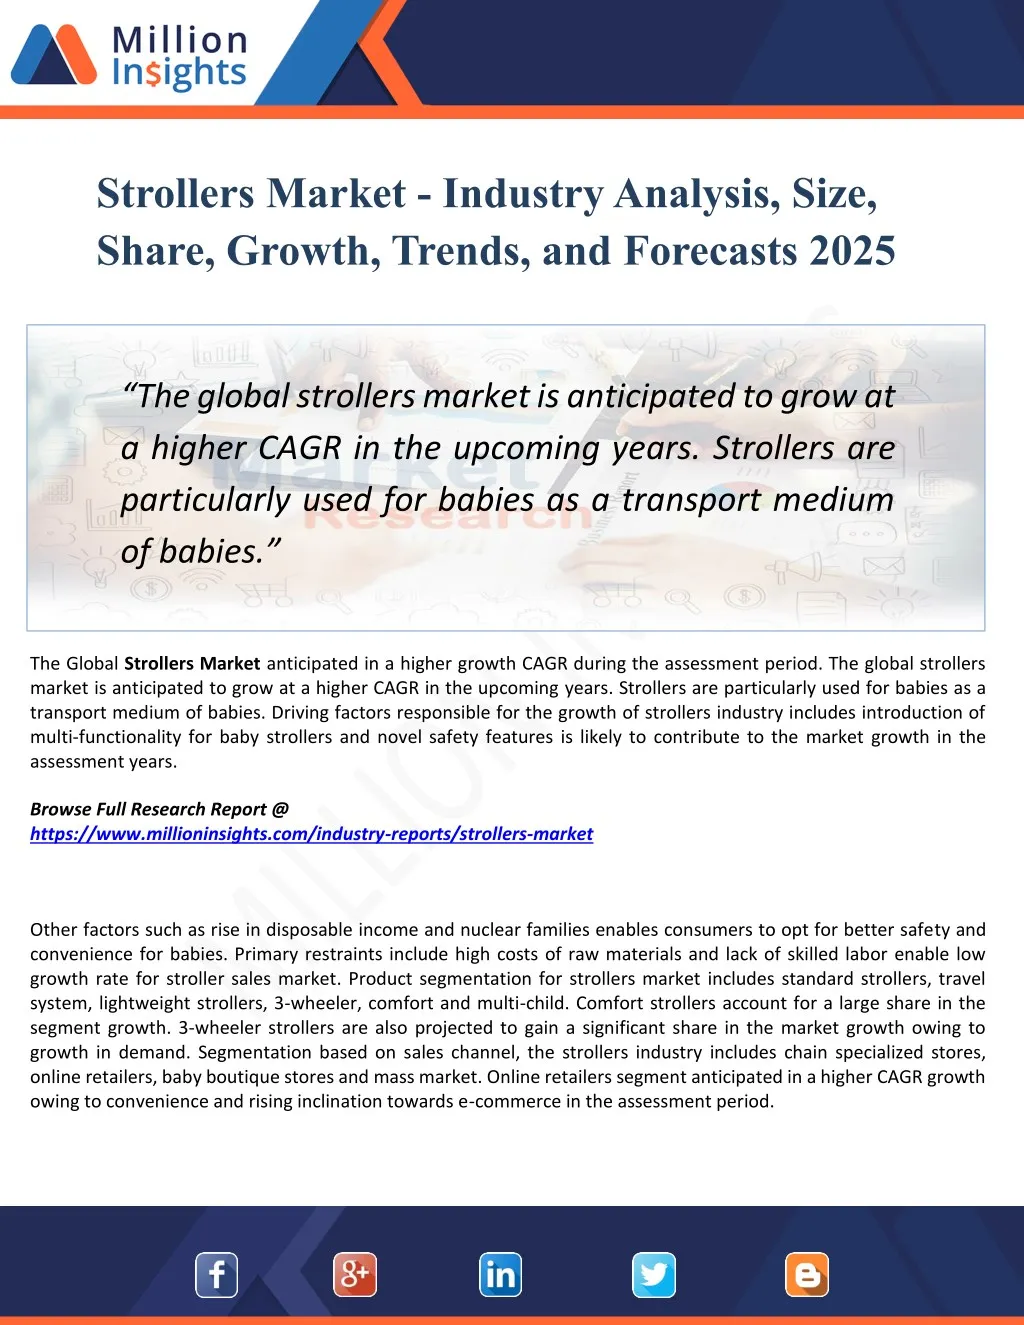 strollers market industry analysis size share